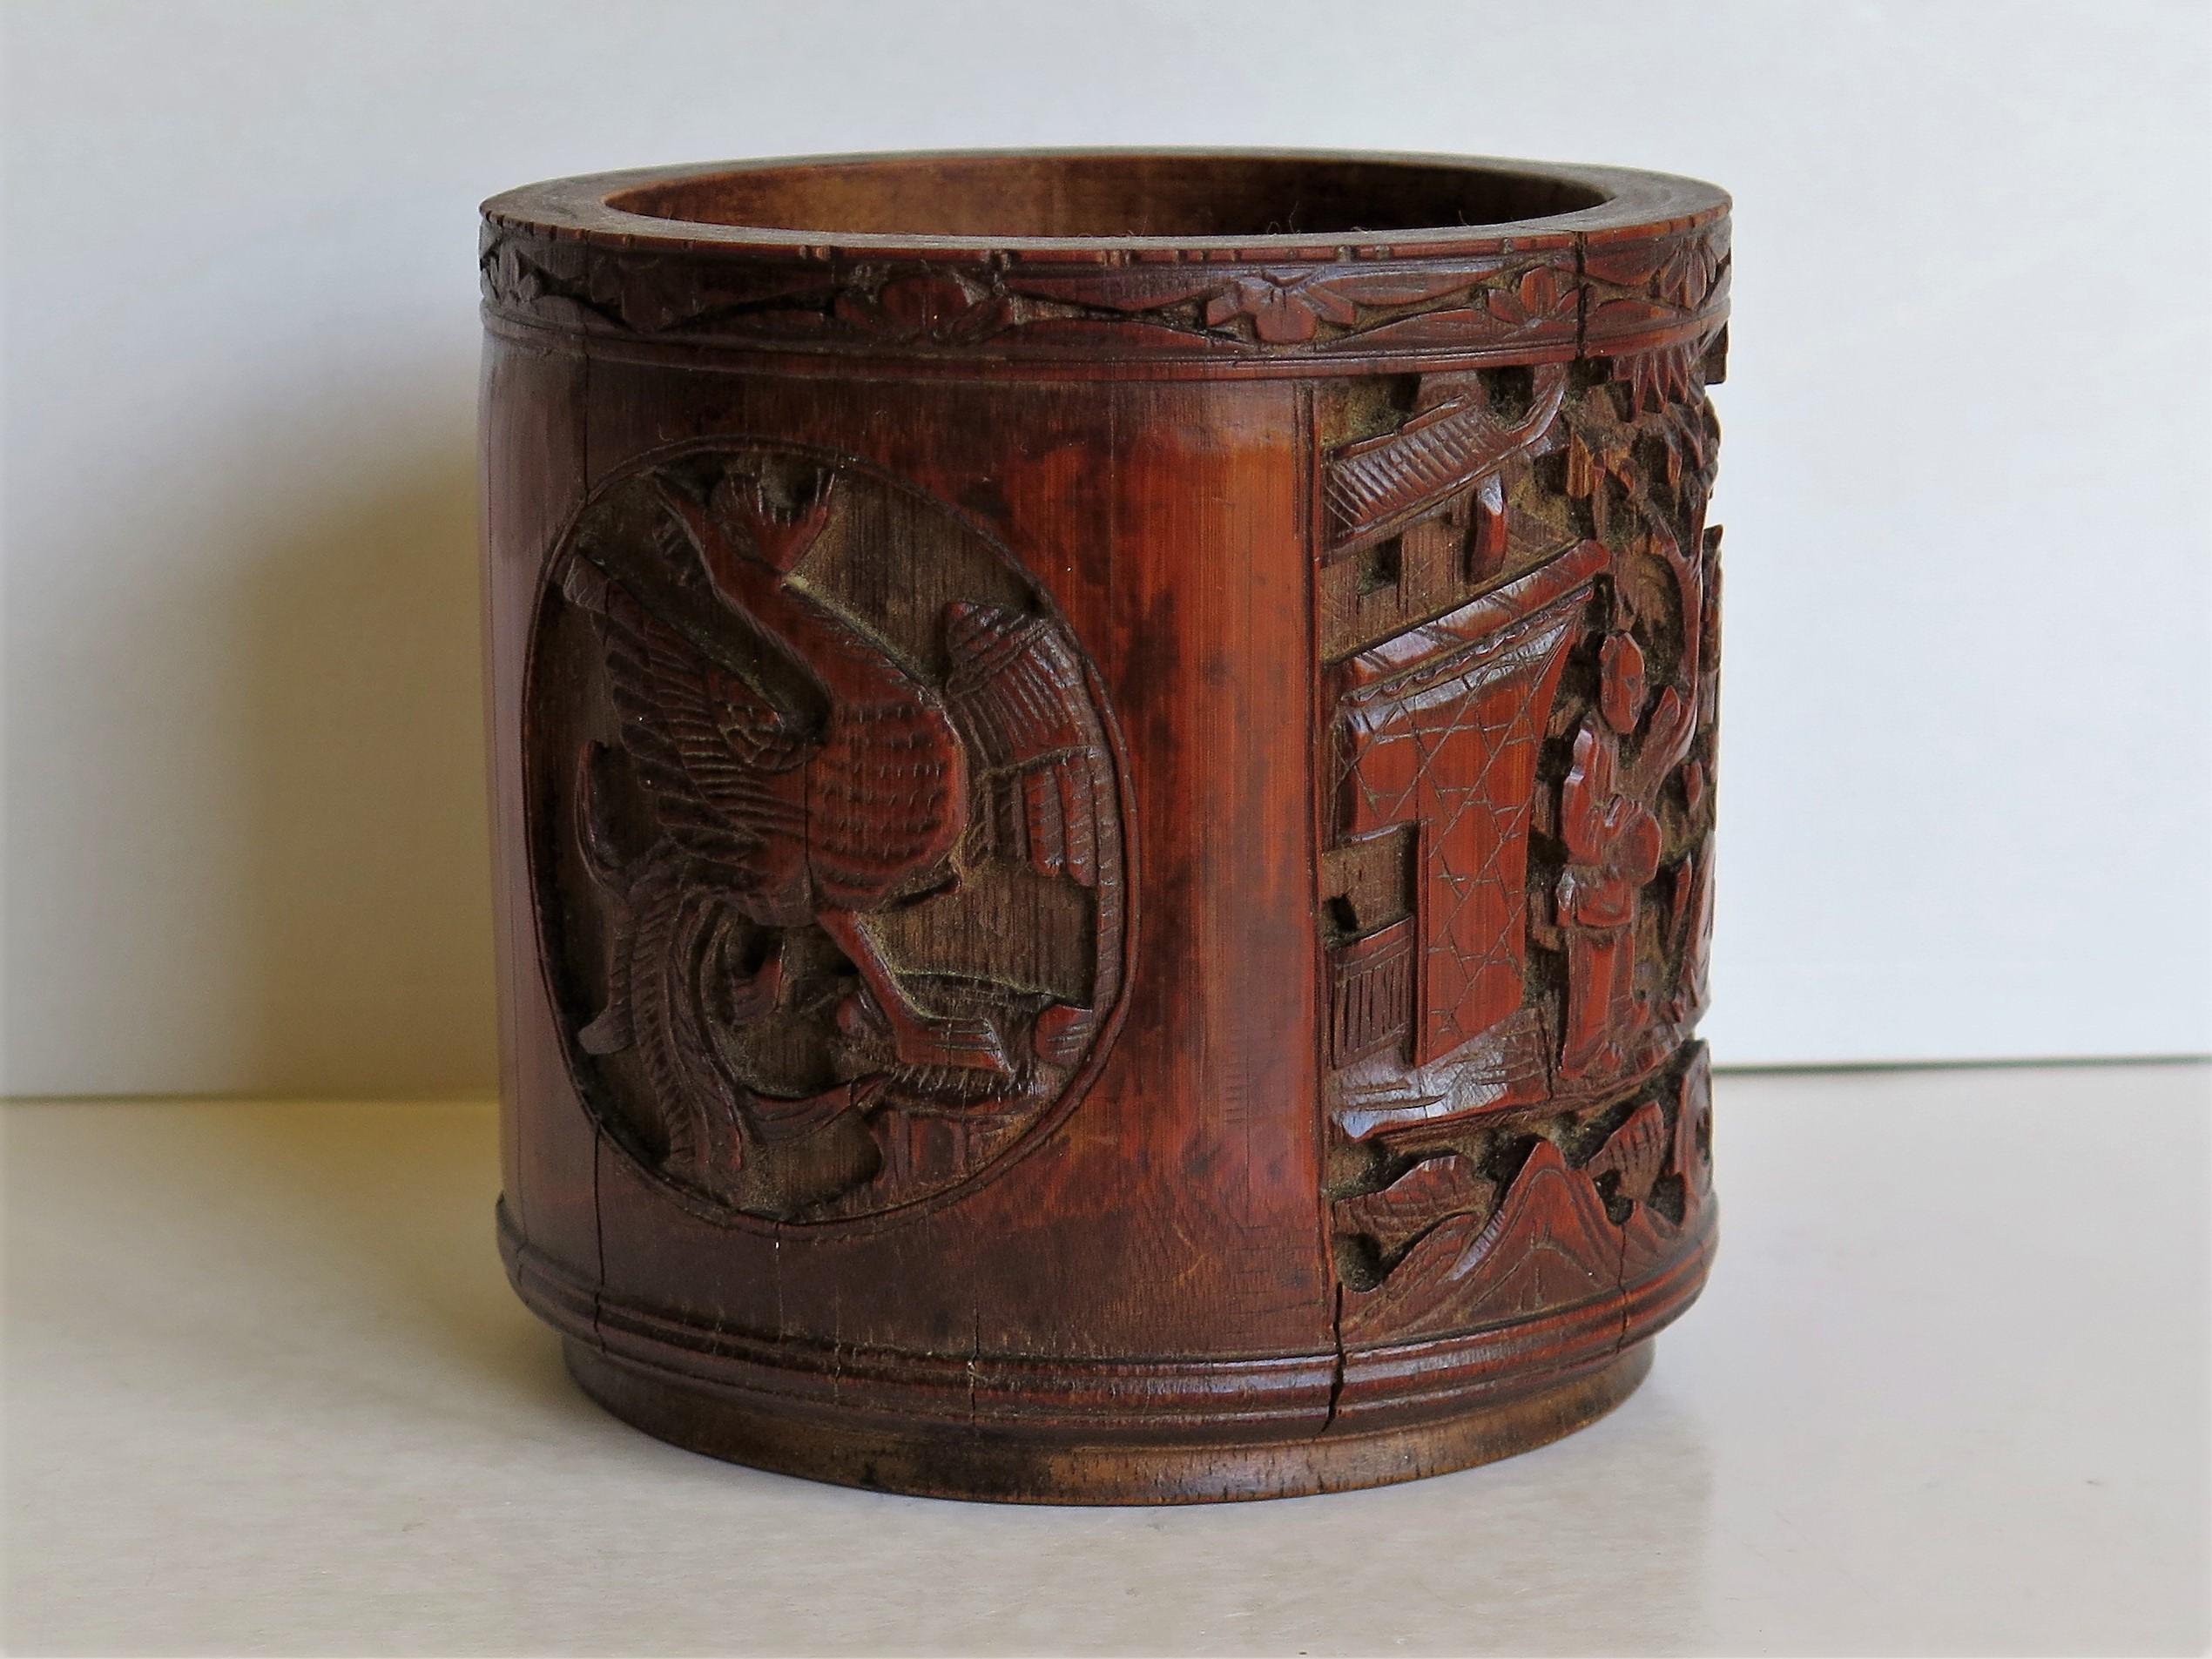 Wood Chinese Brush Pot or Bitong in Bamboo Finely Carved & Signed, Early 19thC. Qing